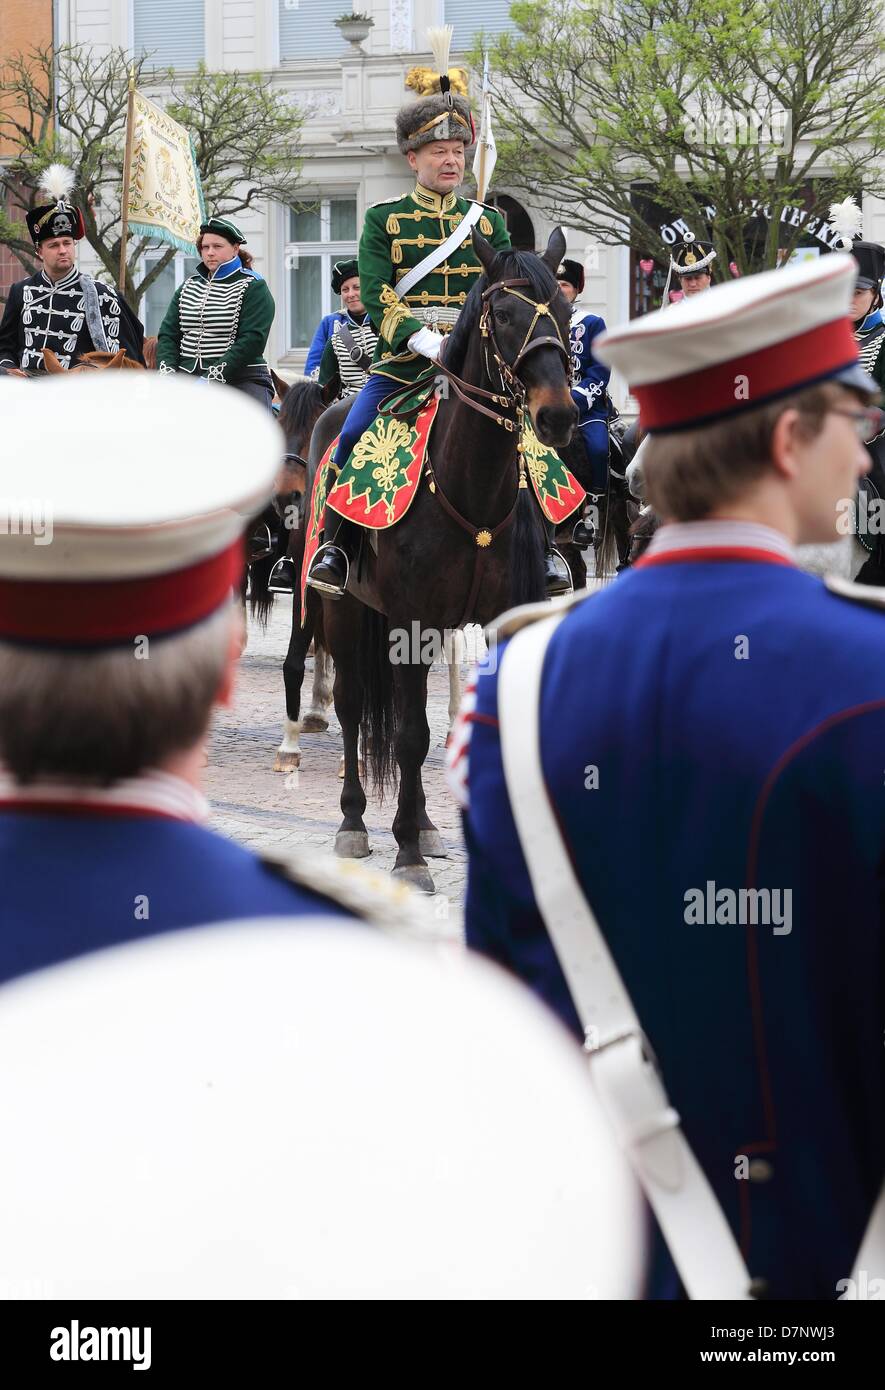 Members of the traditional Magdeburg Hussar Regiment Number 10 arrive for a ceremonial roll call wearing historic uniforms on Marktplatz in Stendal, Germany, 11 May 2013. Events are being held to mark the 200th anniversary of the calvary regiment's formation in the Prussian Army in Stendal. Photo: JENS WOLF Stock Photo